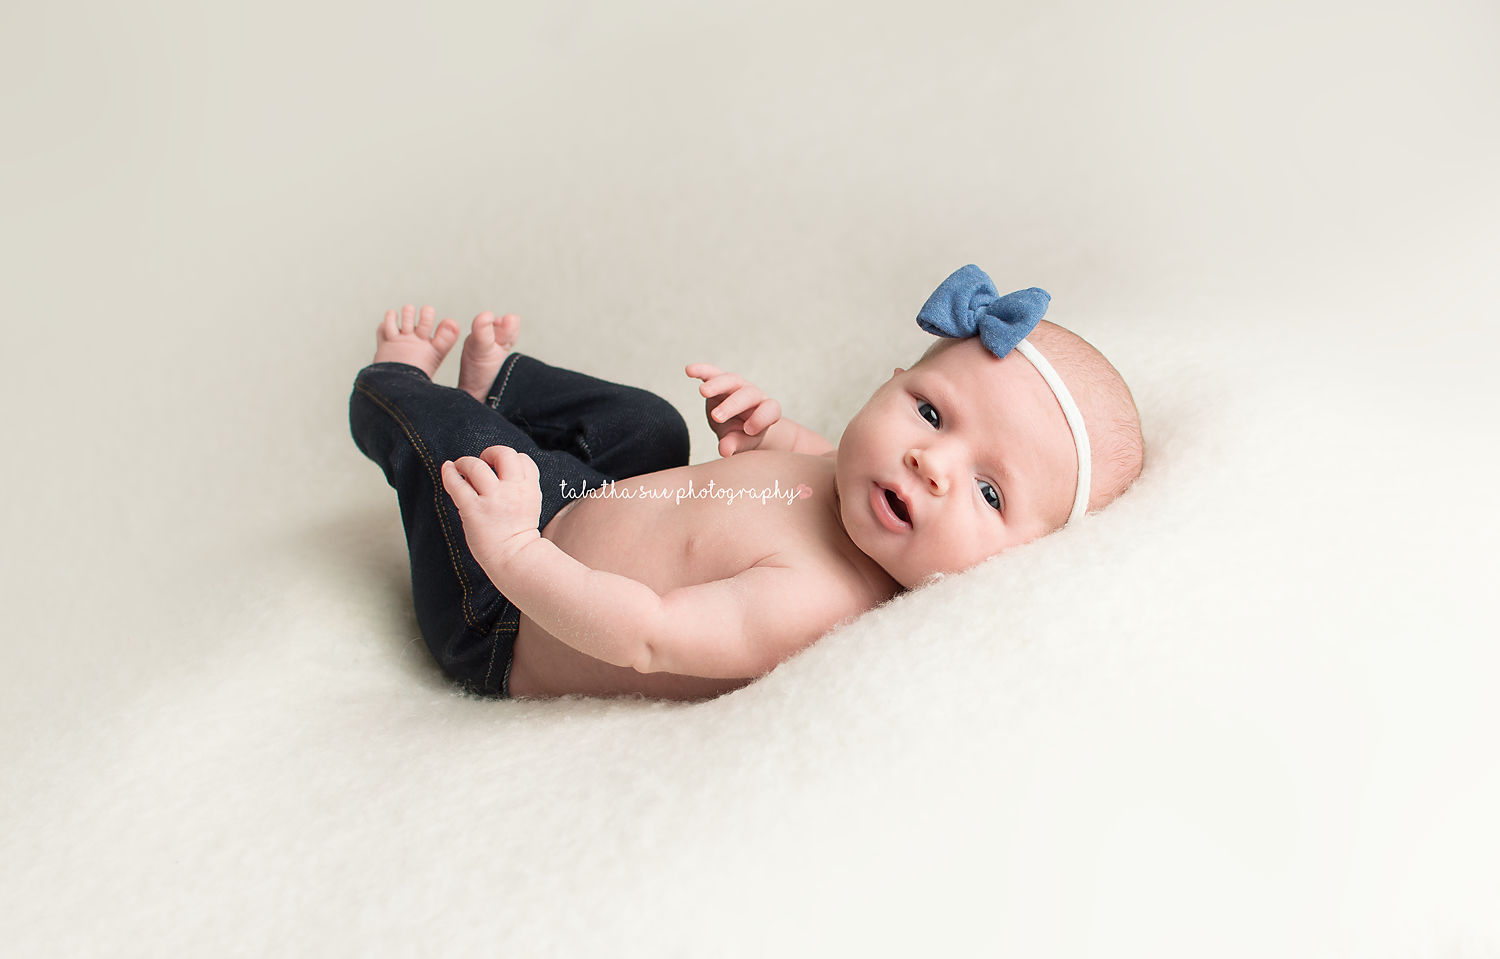 newborn-baby-girl-pictures-professional-photography-studio-in-northeast-ohio-cleveland-baby-photographer-baby-wearing-blue-bow-headband-and-tiny-jeans.png